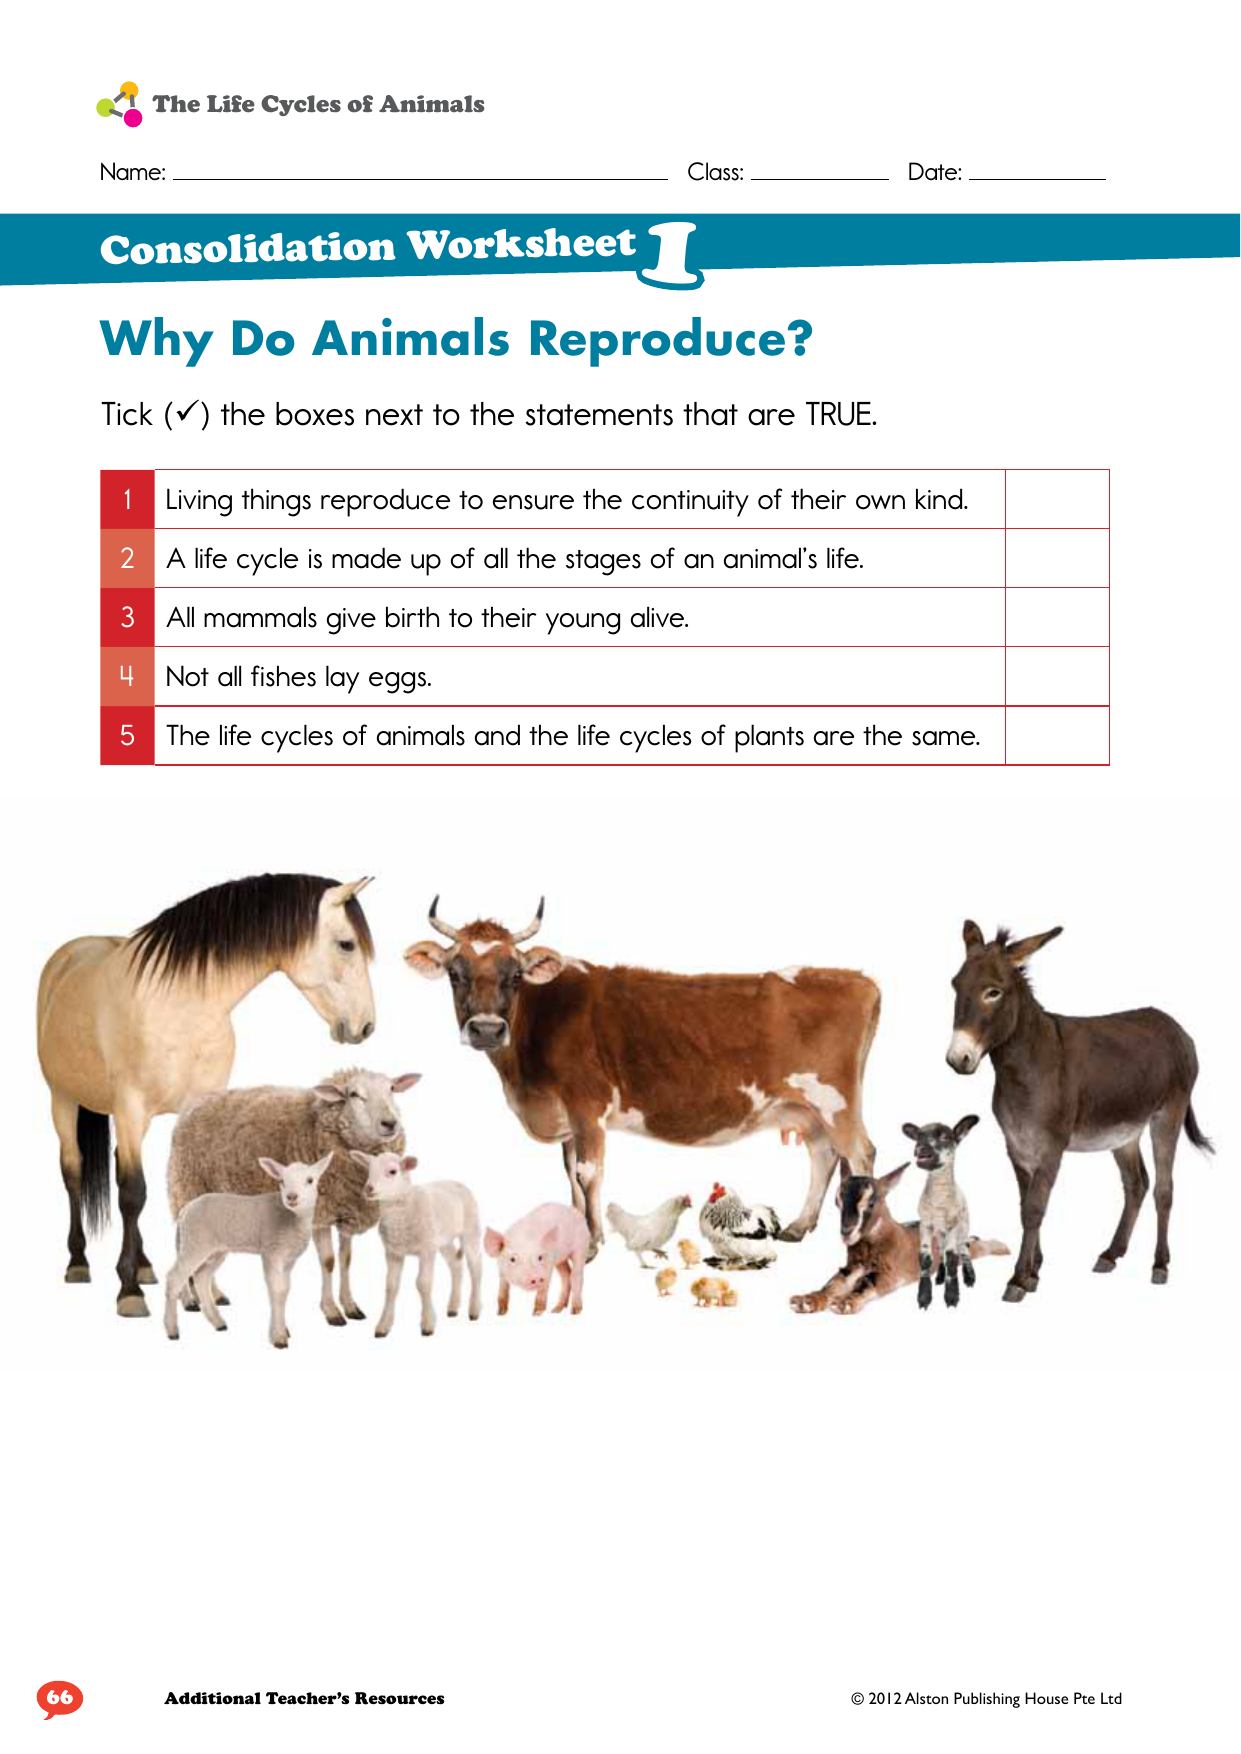 Why Do Animals Reproduce?